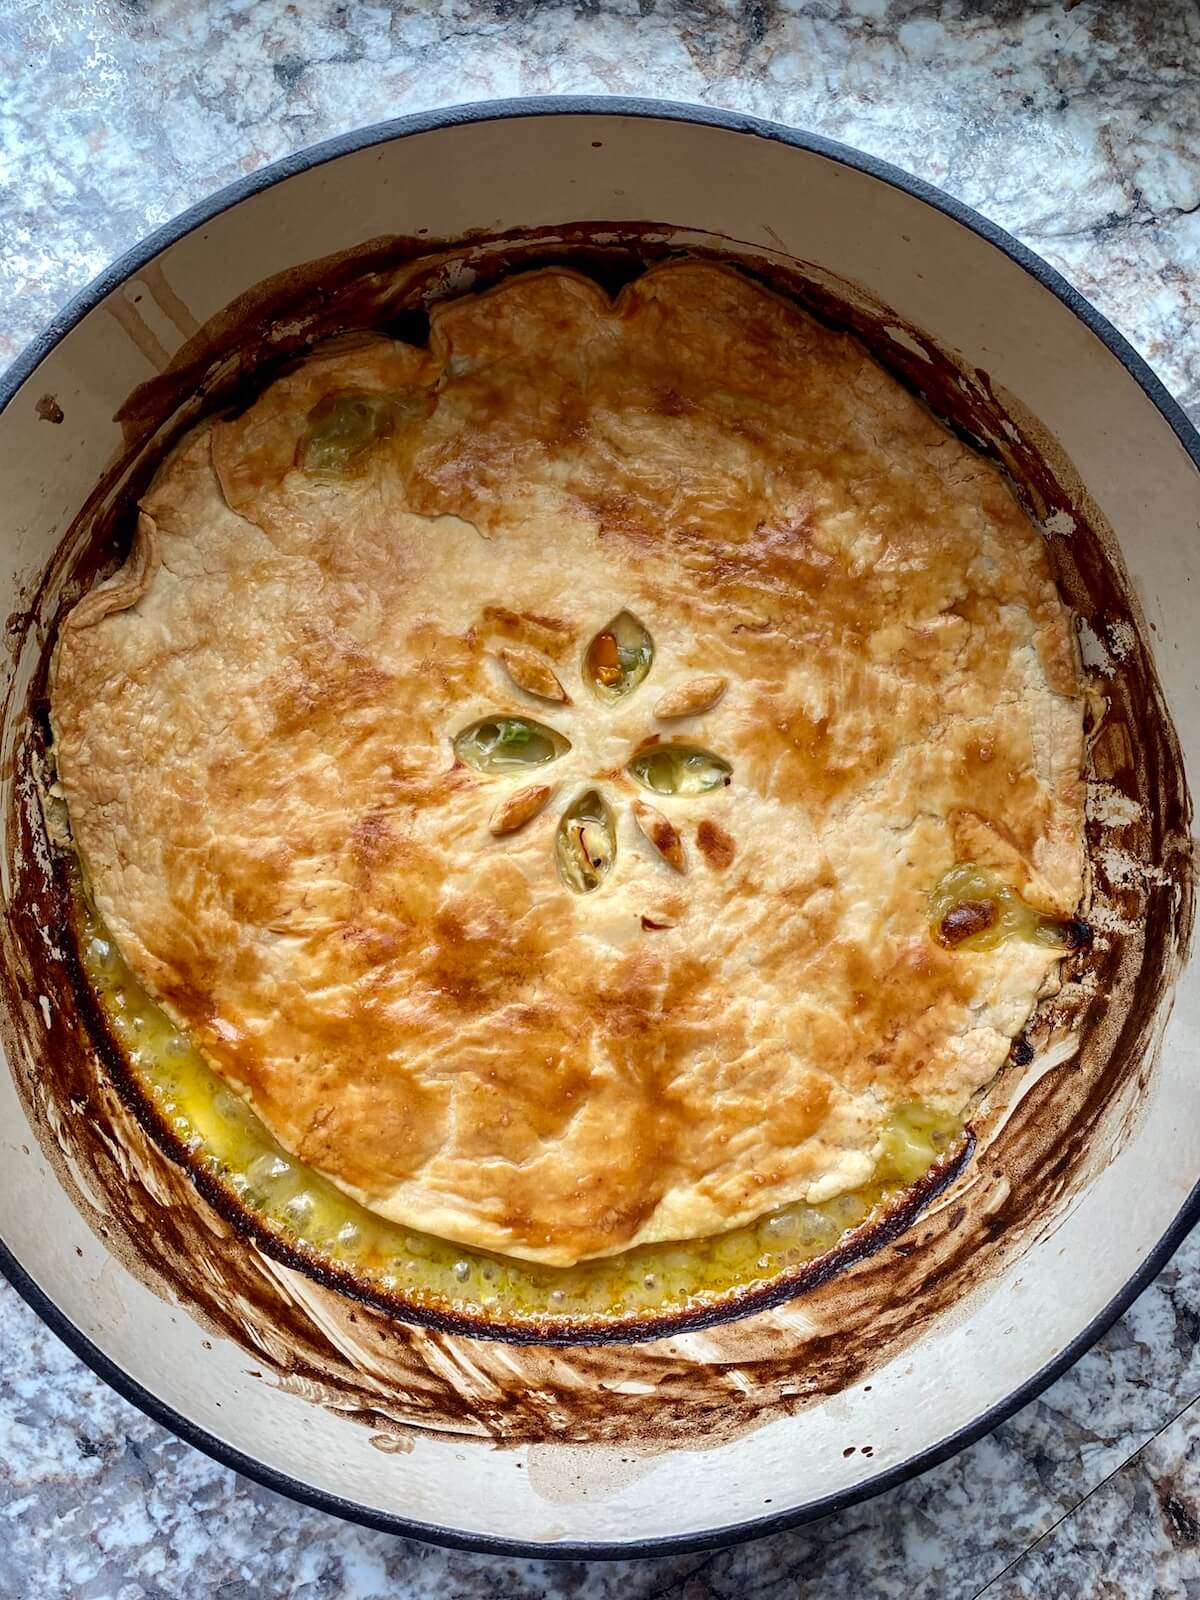 The finished dutch oven chicken pot pie. The crust is golden brown and the filling is bubbling around the edges.